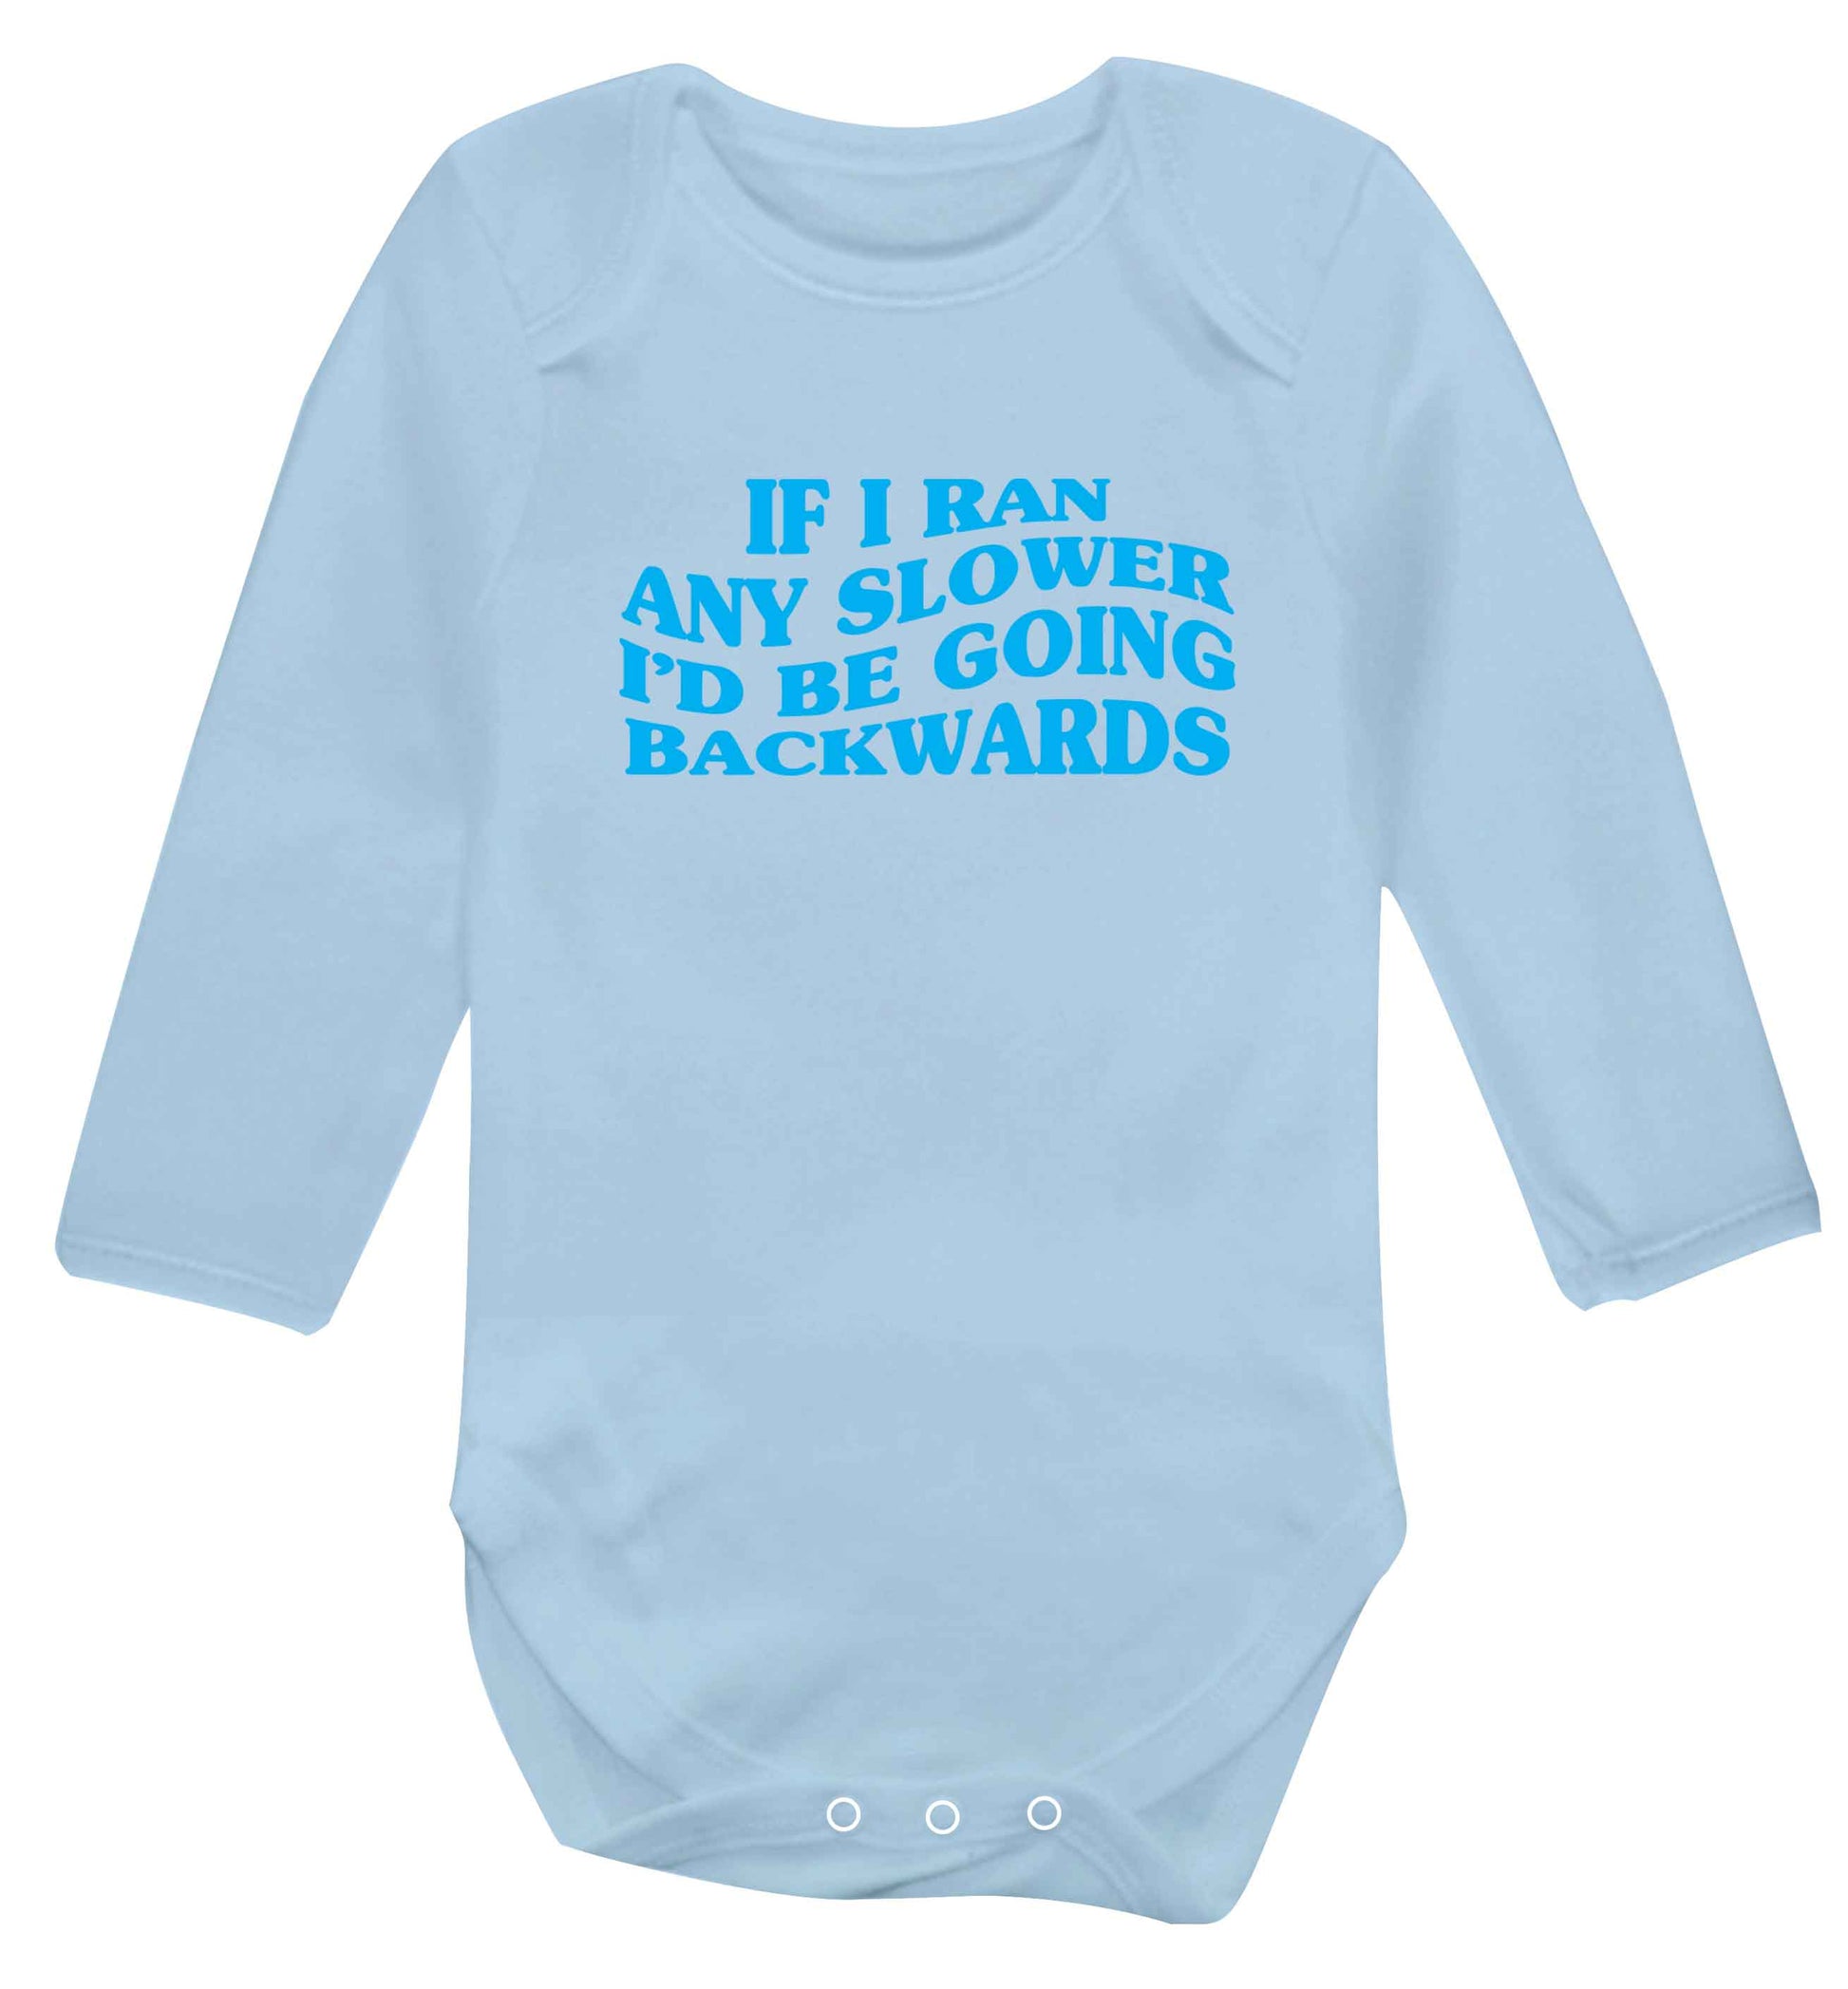 If I ran any slower I'd be going backwards baby vest long sleeved pale blue 6-12 months